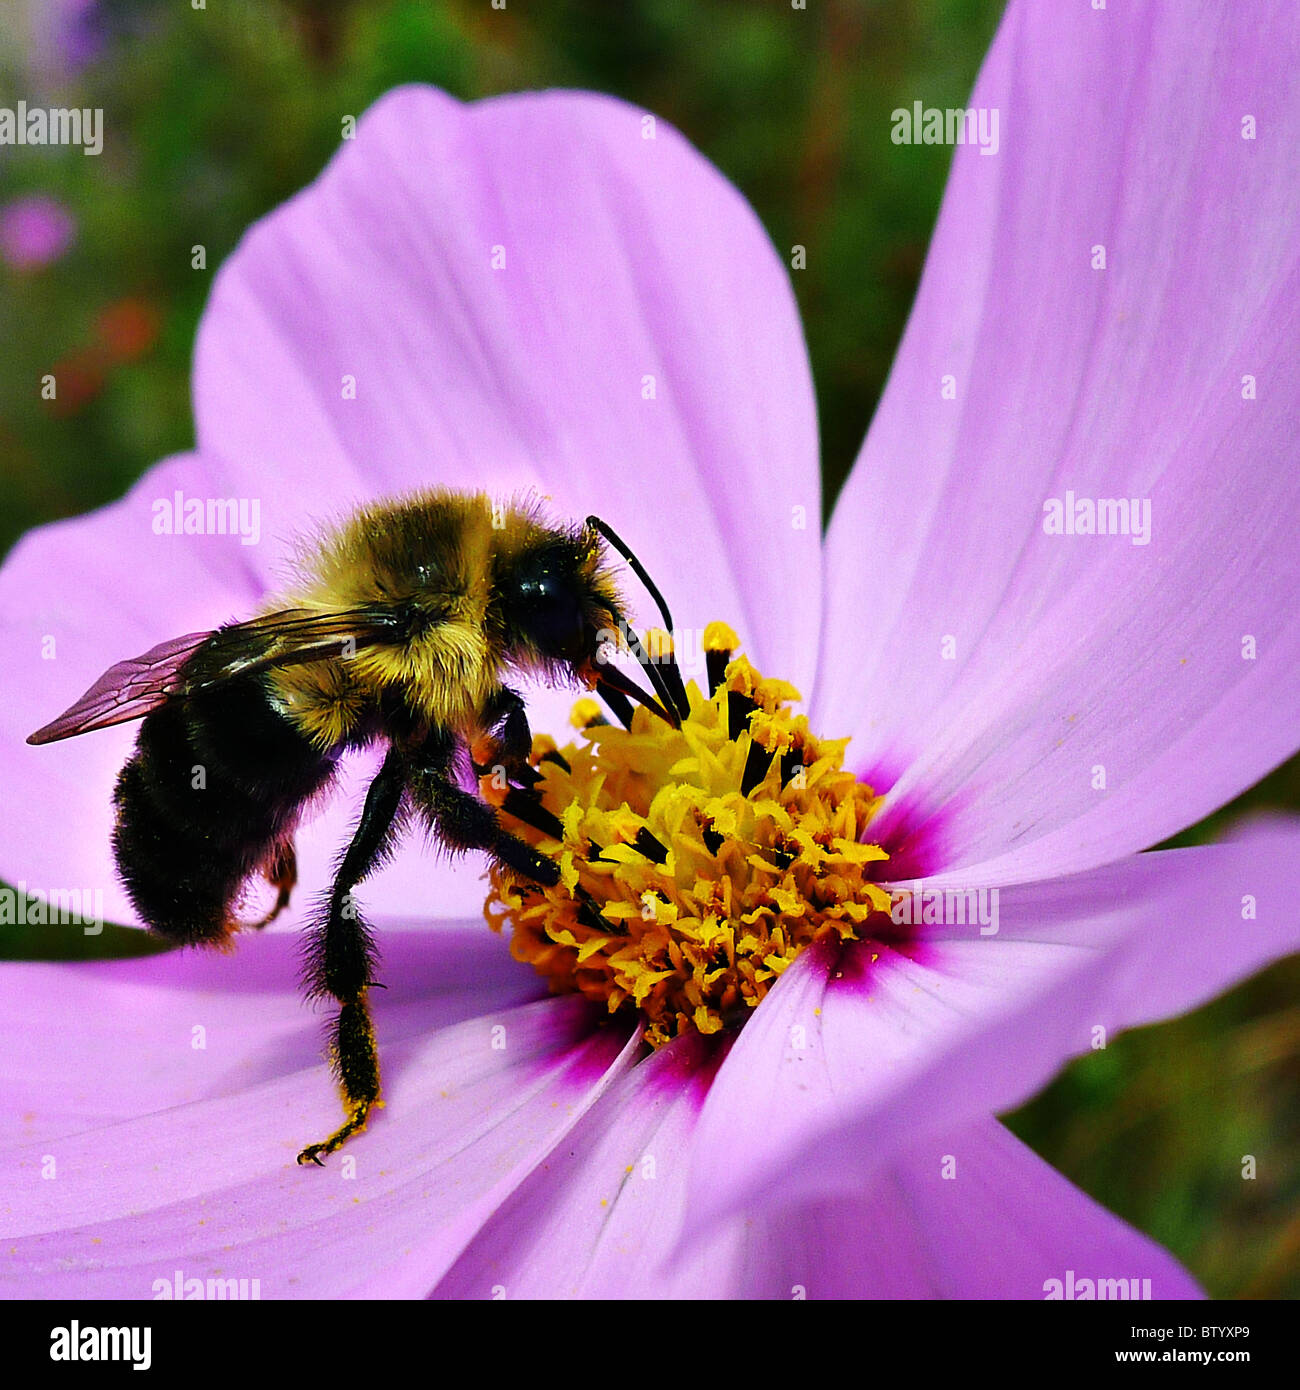 A single honey bee pollinating a spring flower. Stock Photo